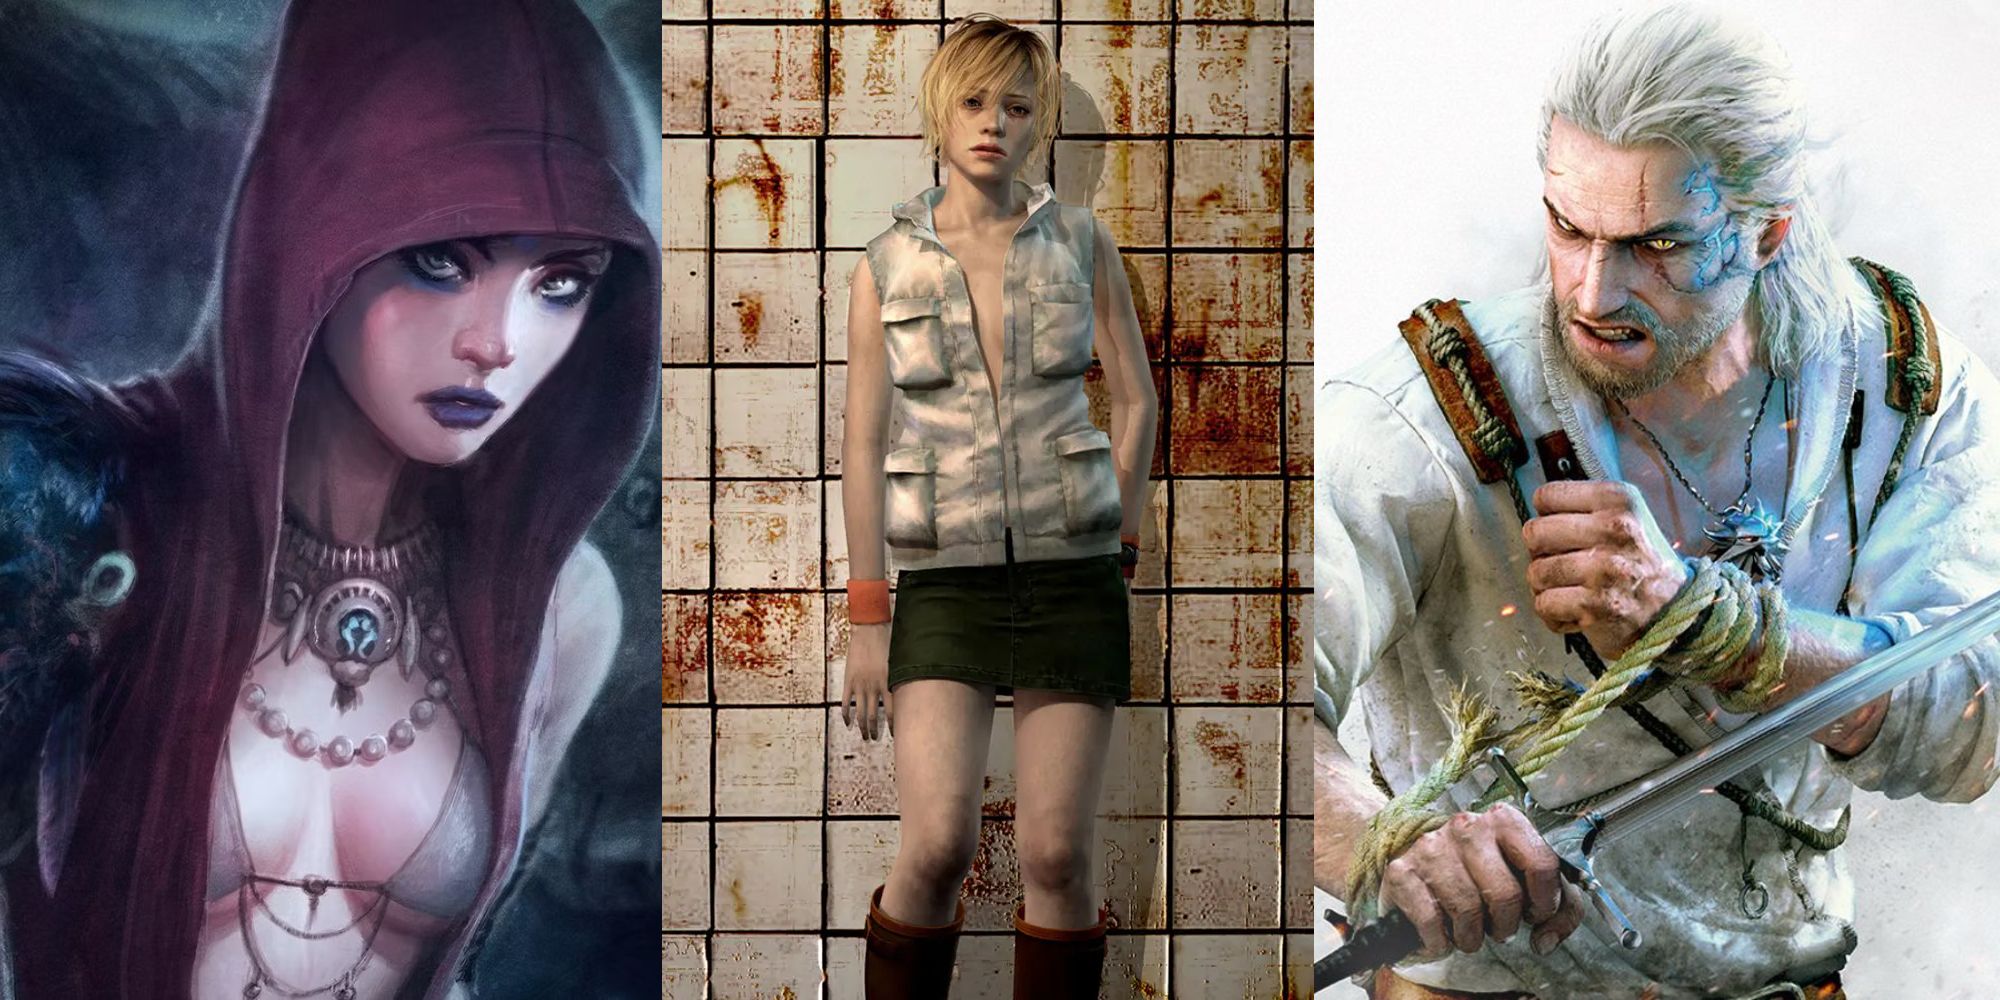 X Best Video Game Riddles, Ranked Split image Dragon Age Origins, Silent Hill 3, The Witcher 3